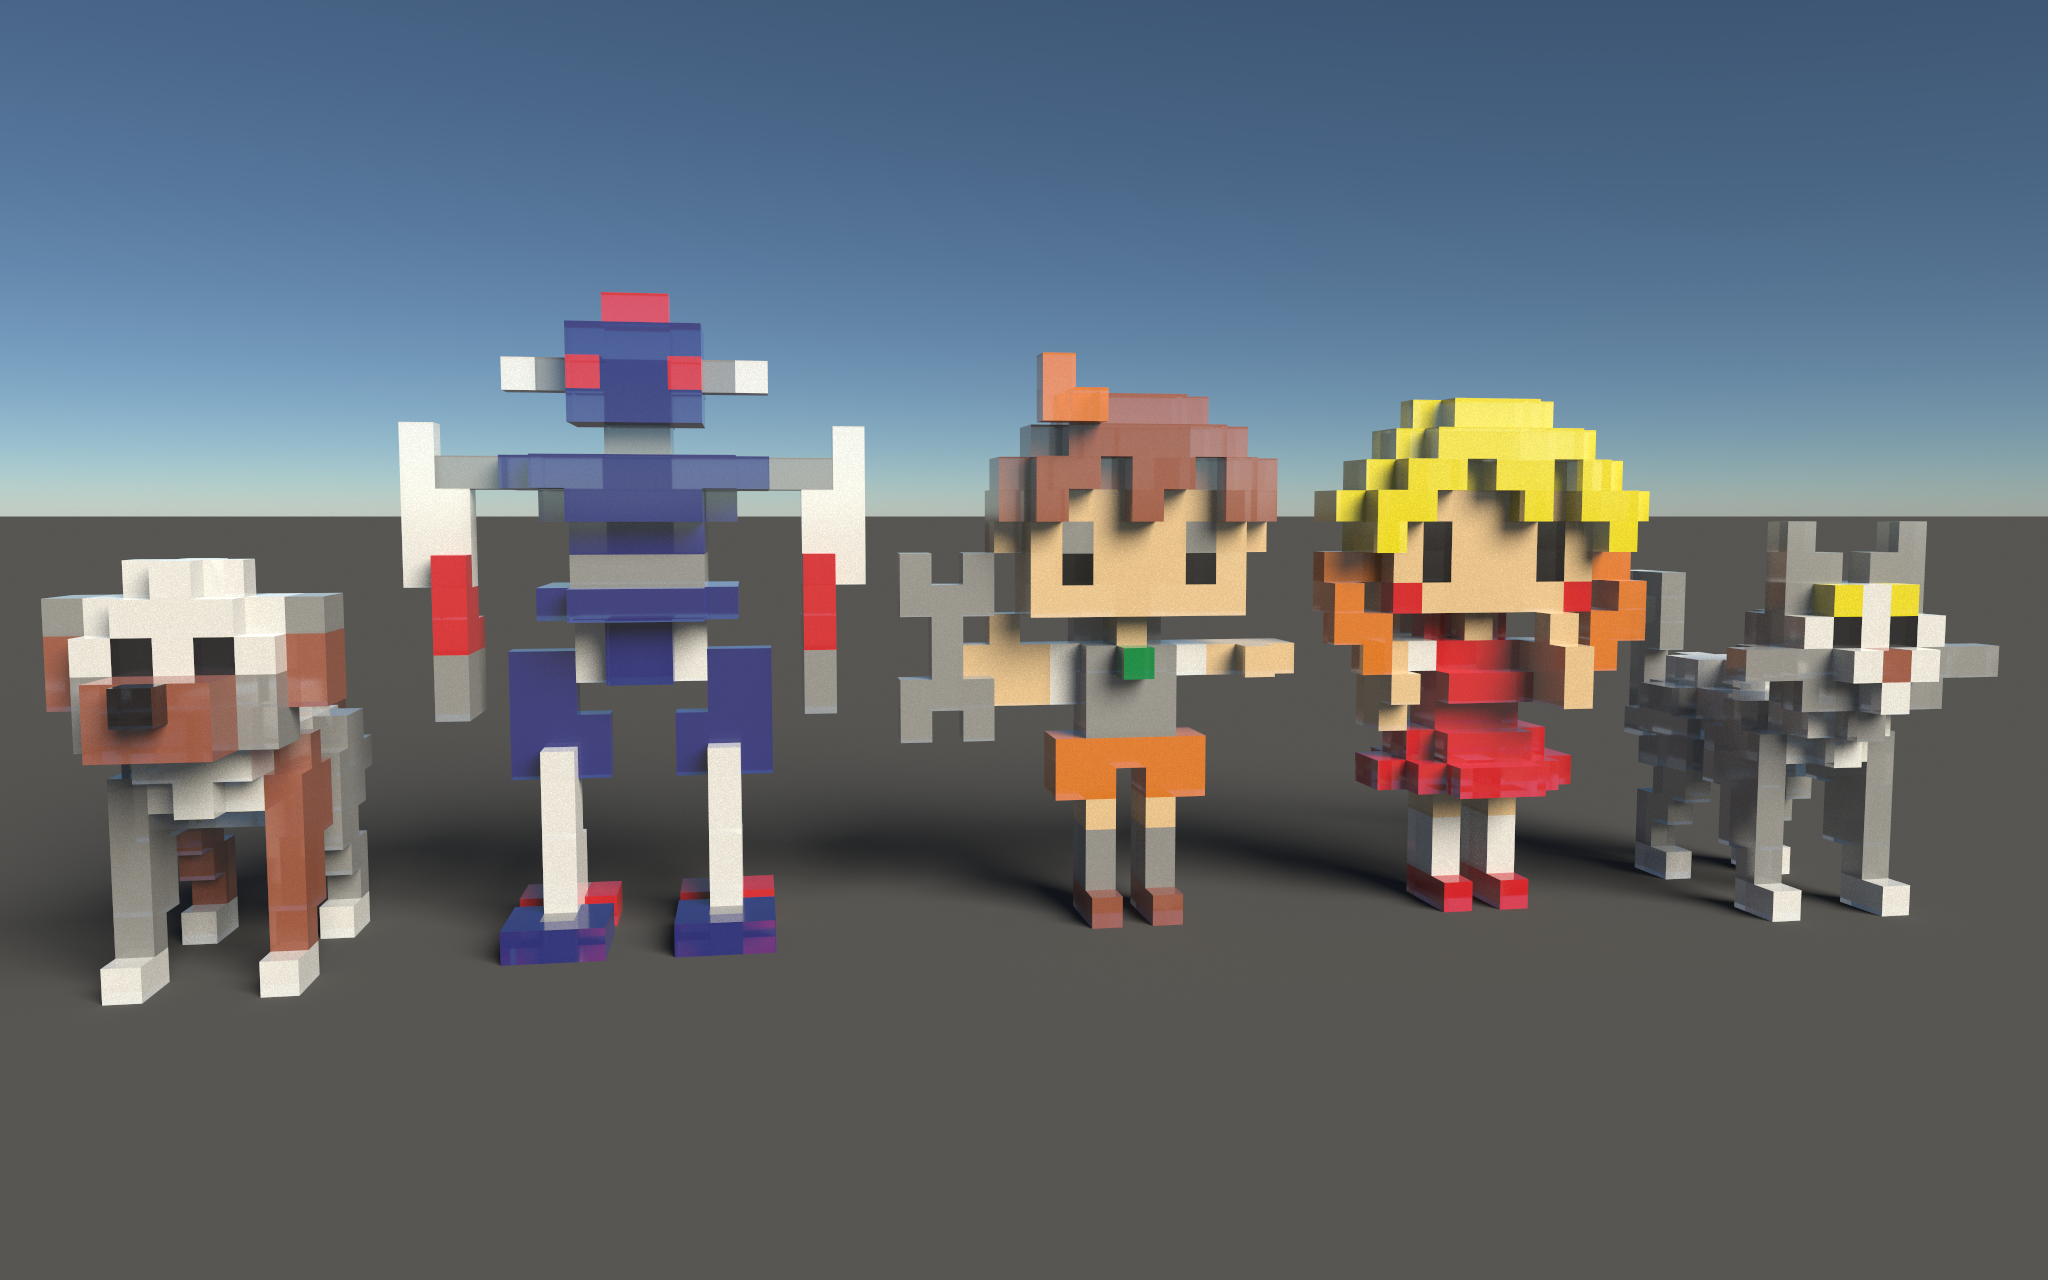 Five complex characters designed by PC free voxel editing software MagicaVoxel